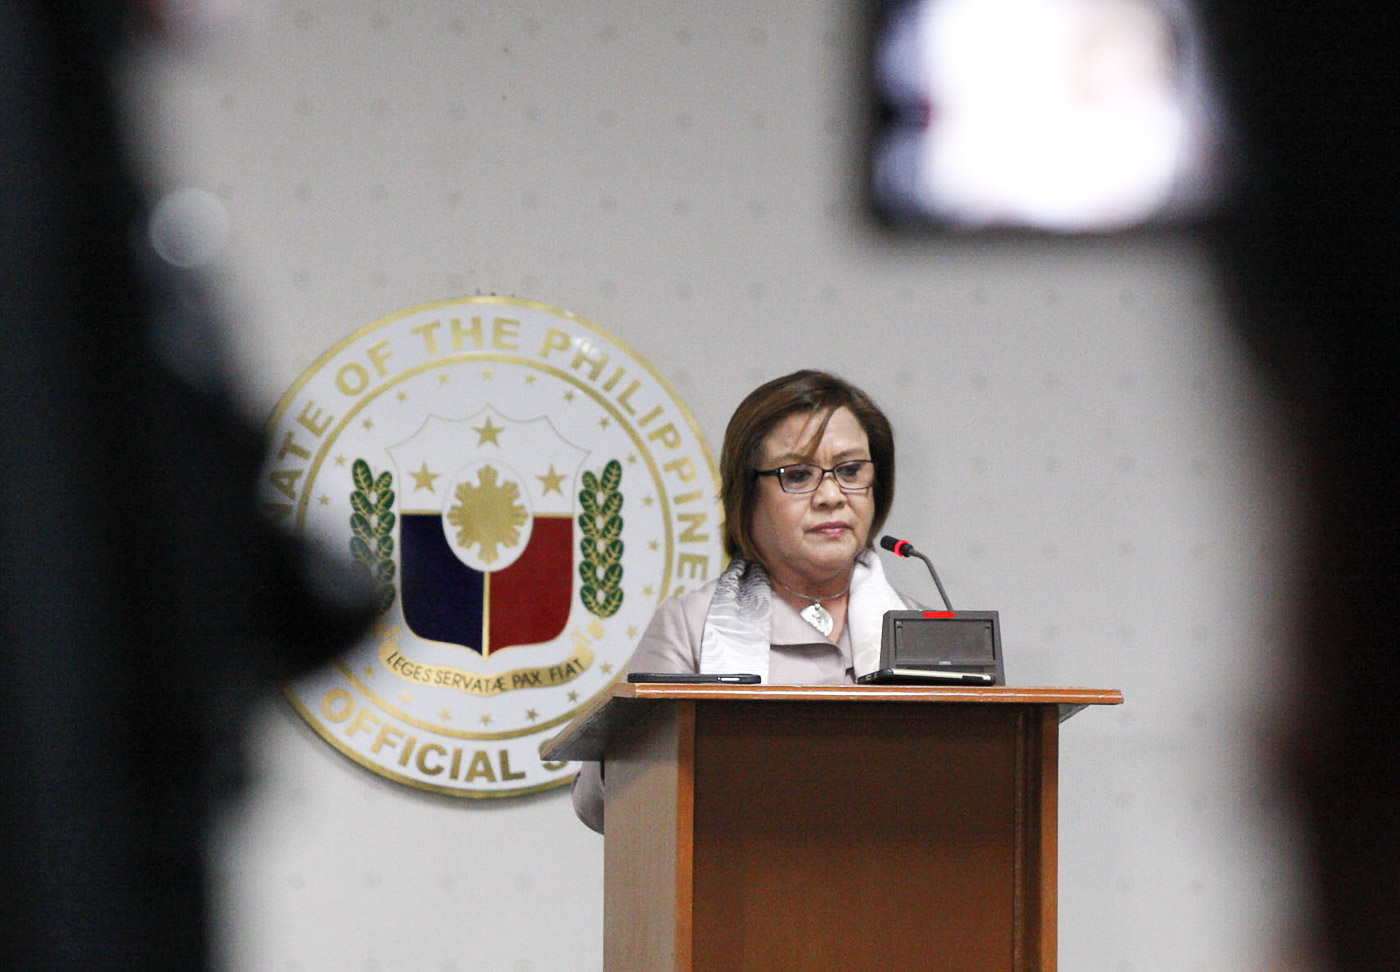 RESPONSE TO DUTERTE. Senator Leila de Lima says she won't back down from the Senate probe into alleged extrajudicial killings in the war on drugs, during a news conference on August 18, 2016. Photo by Alex Nuevaespaña/PRIB 